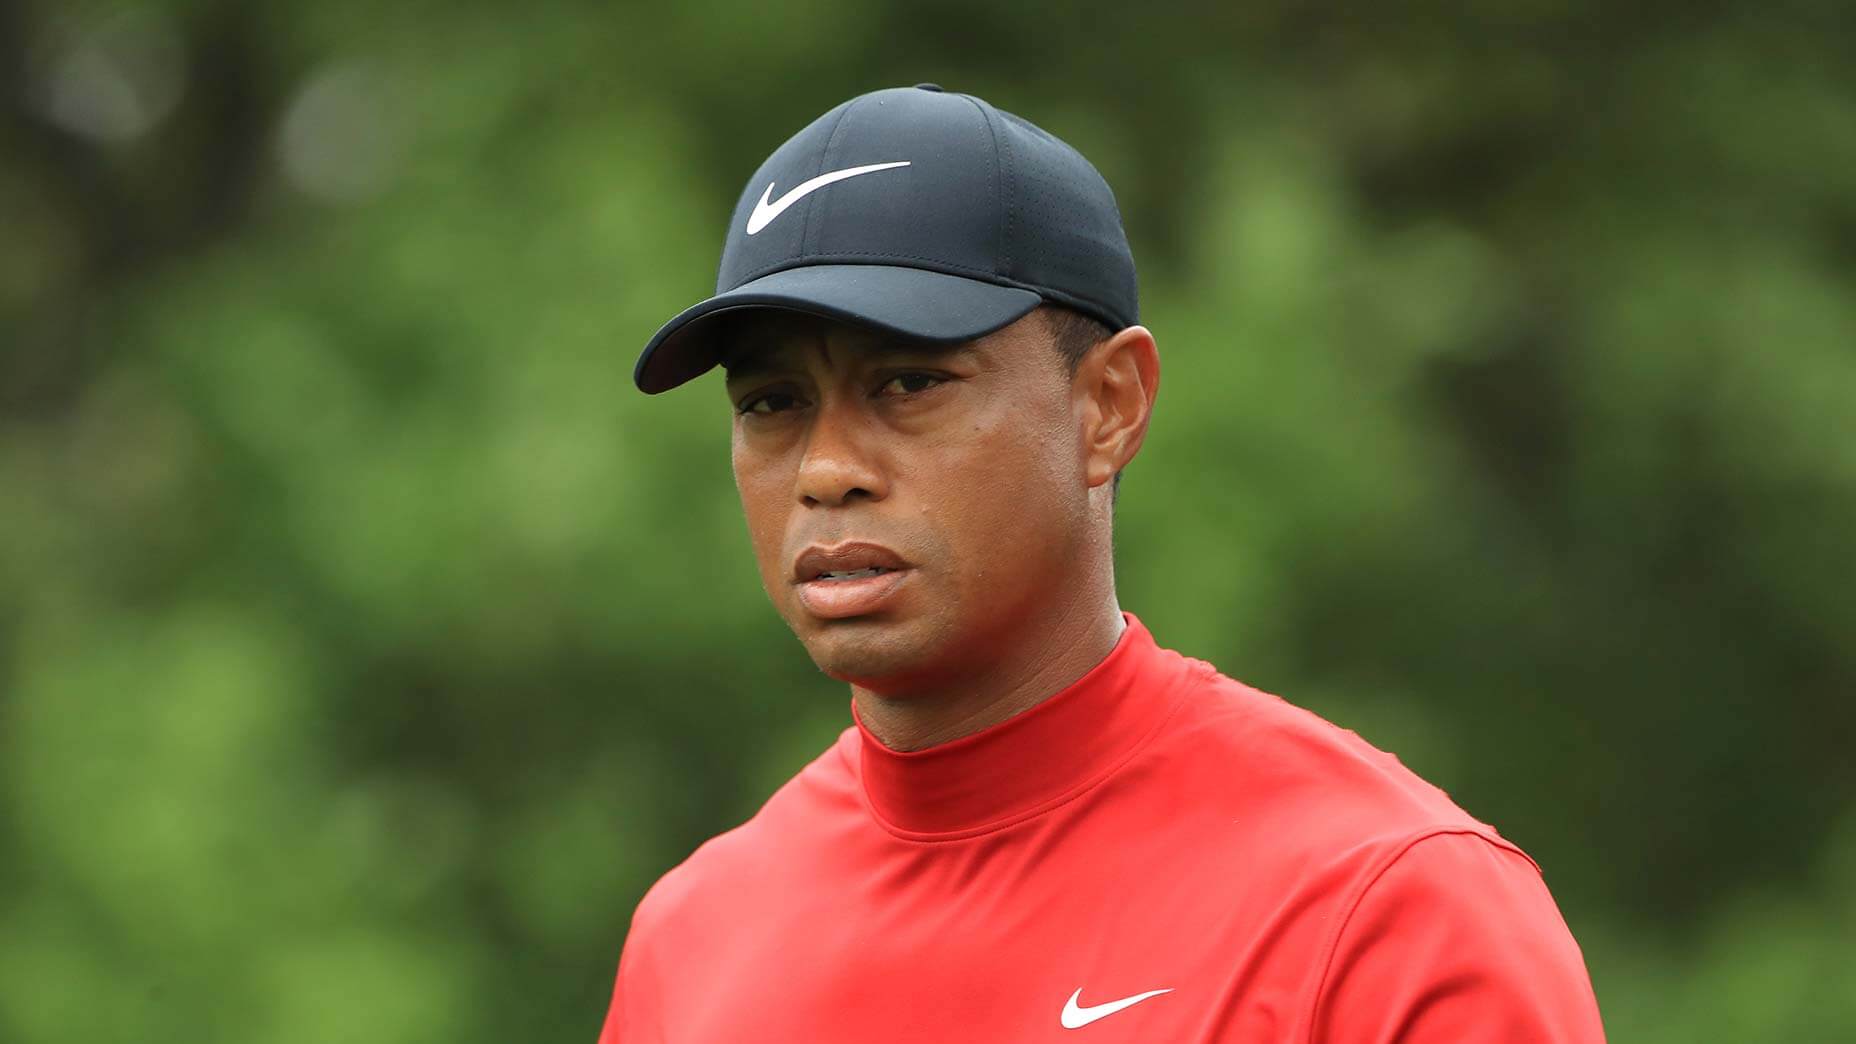 Tiger Woods Injured In Serious Car Accident ‘Jaws Of Life’ Used To Save Him!